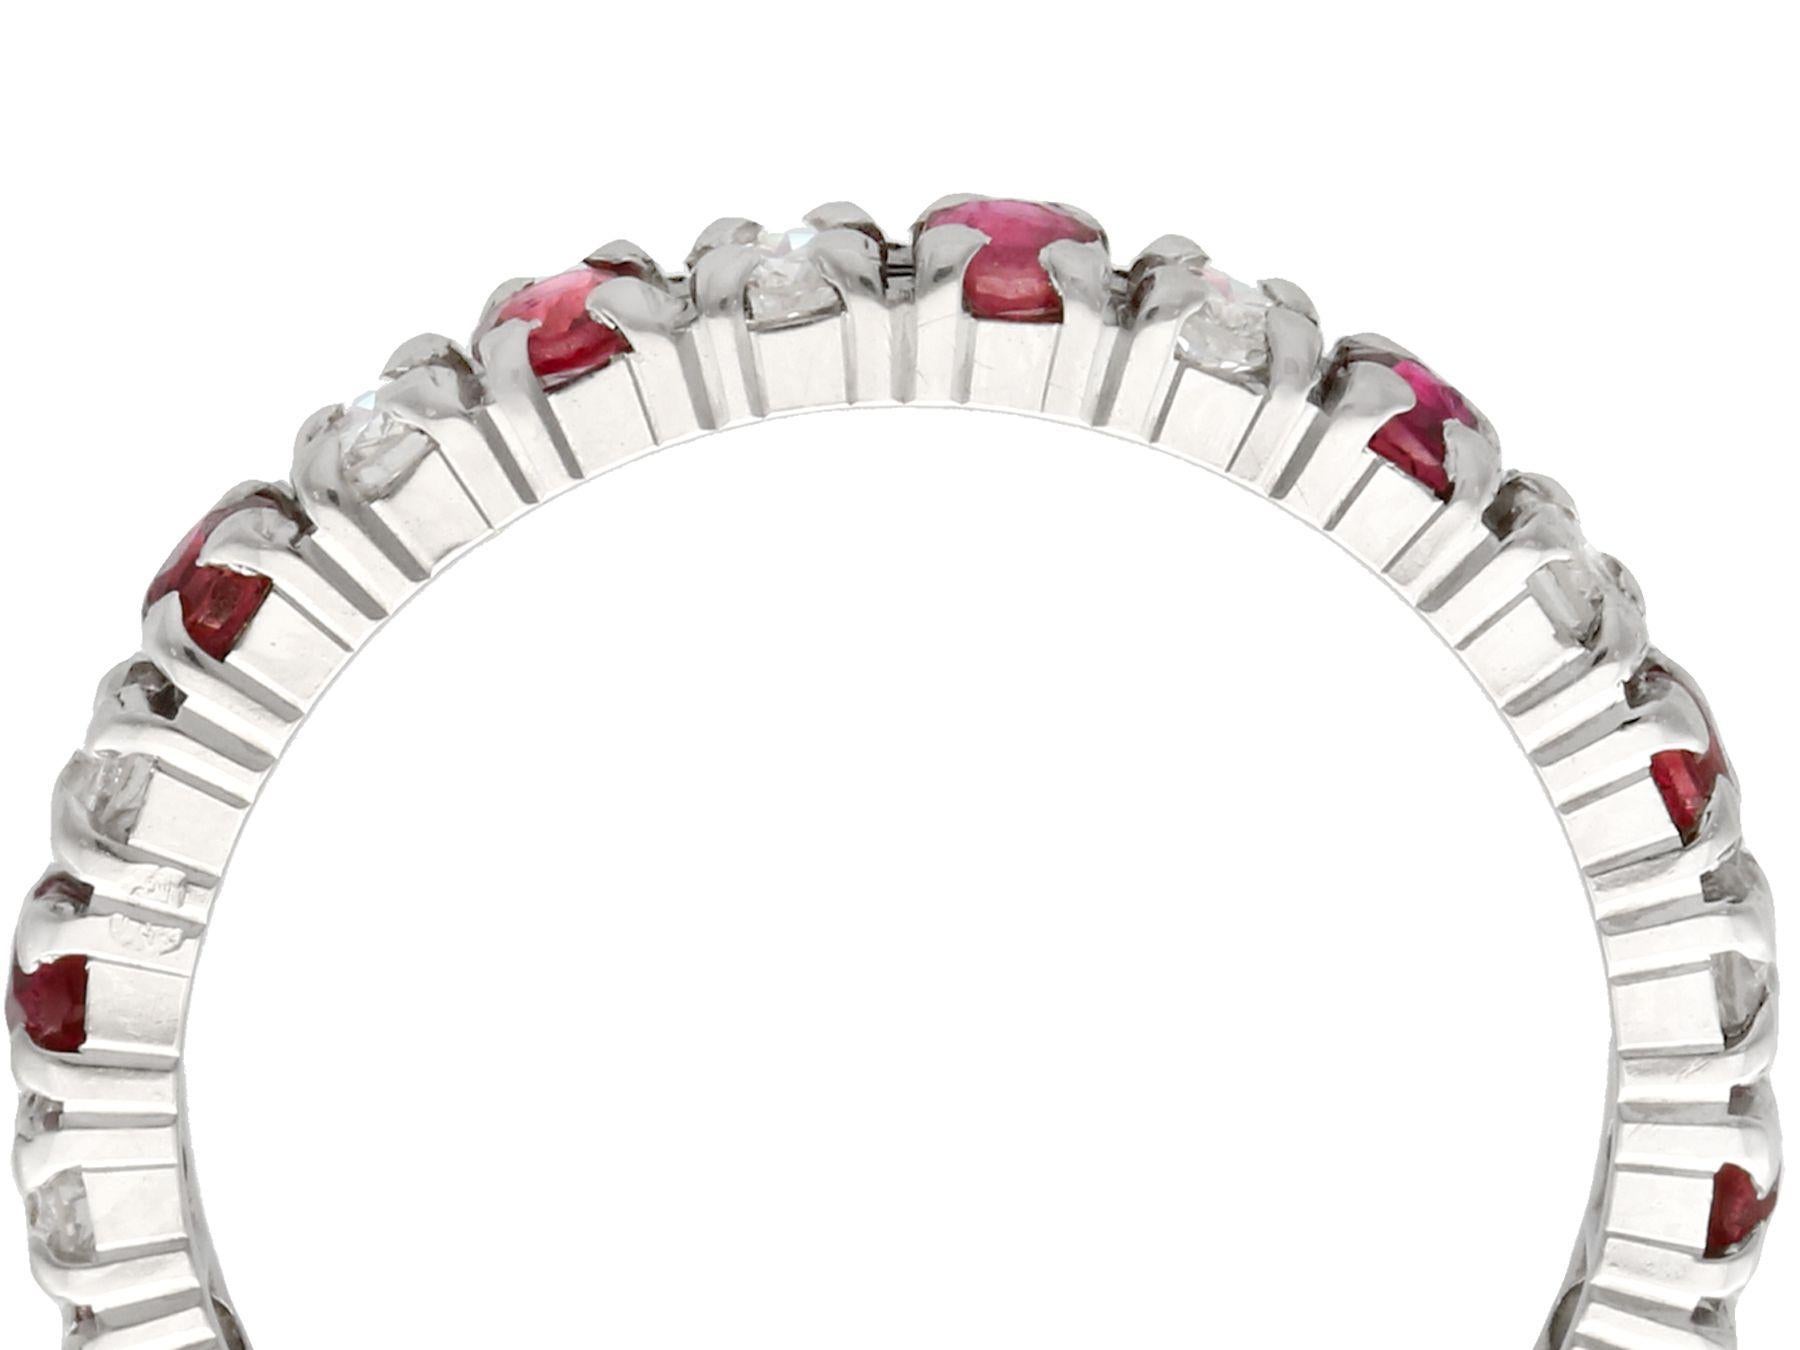 An impressive vintage 1970s 0.20 carat ruby and 0.16 carat diamond, 18 karat white gold full eternity ring; part of our diverse gemstone jewelry and estate jewelry collections.

This fine and impressive ruby and diamond eternity ring has been